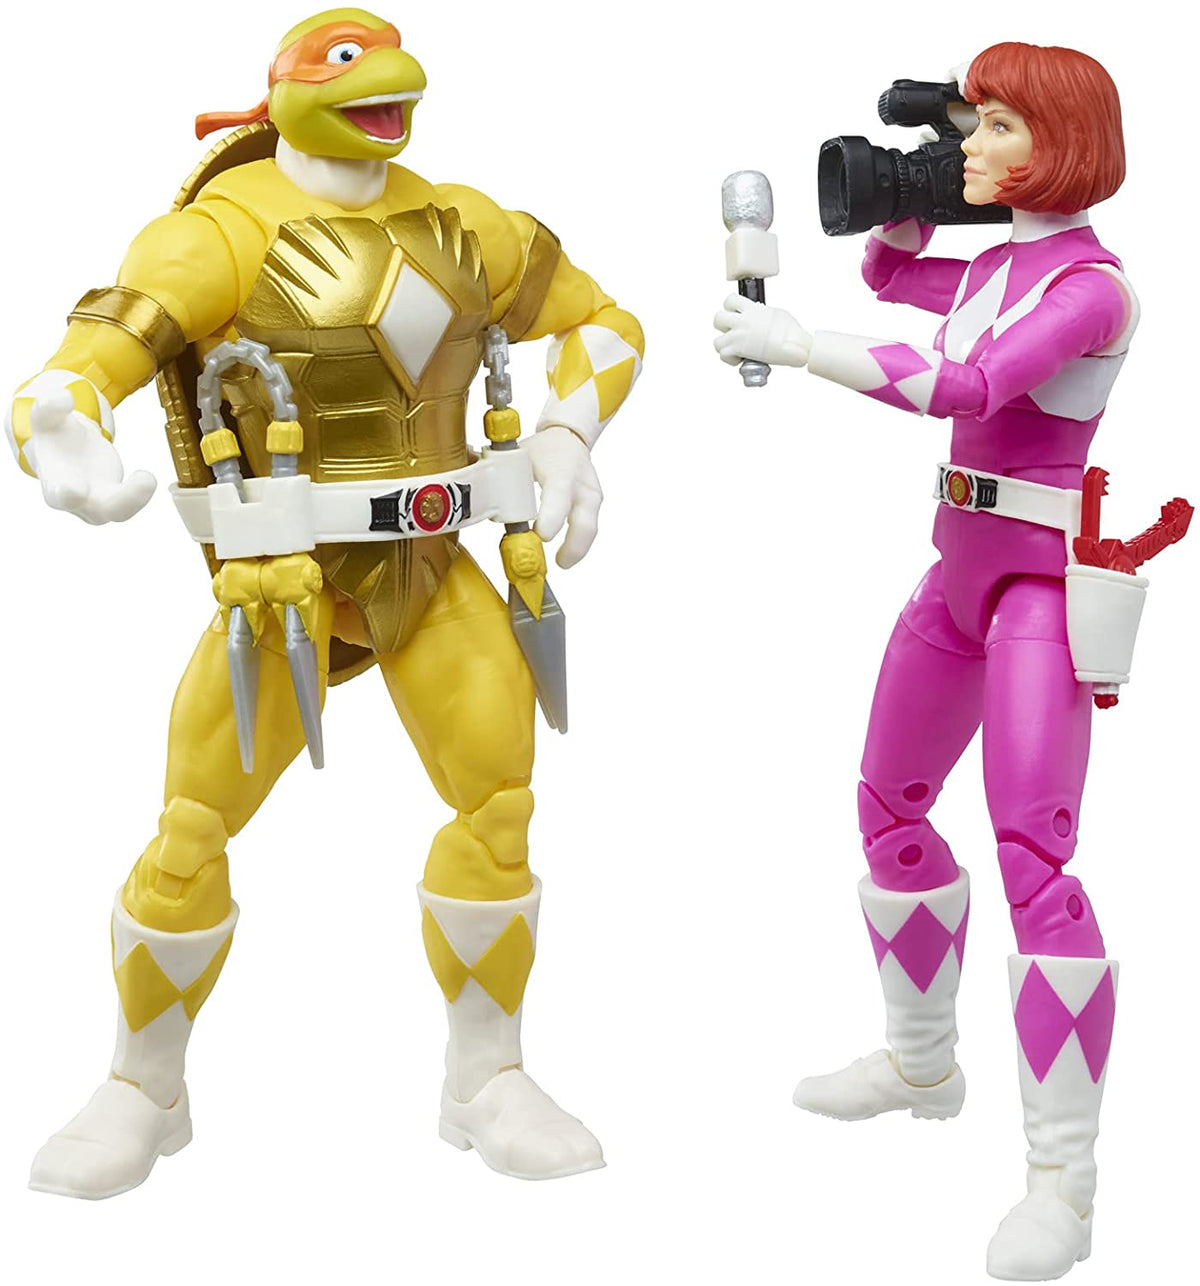 Hasbro MMPR/TMNT Lightning, Mike and April as Yellow and Pink Rangers